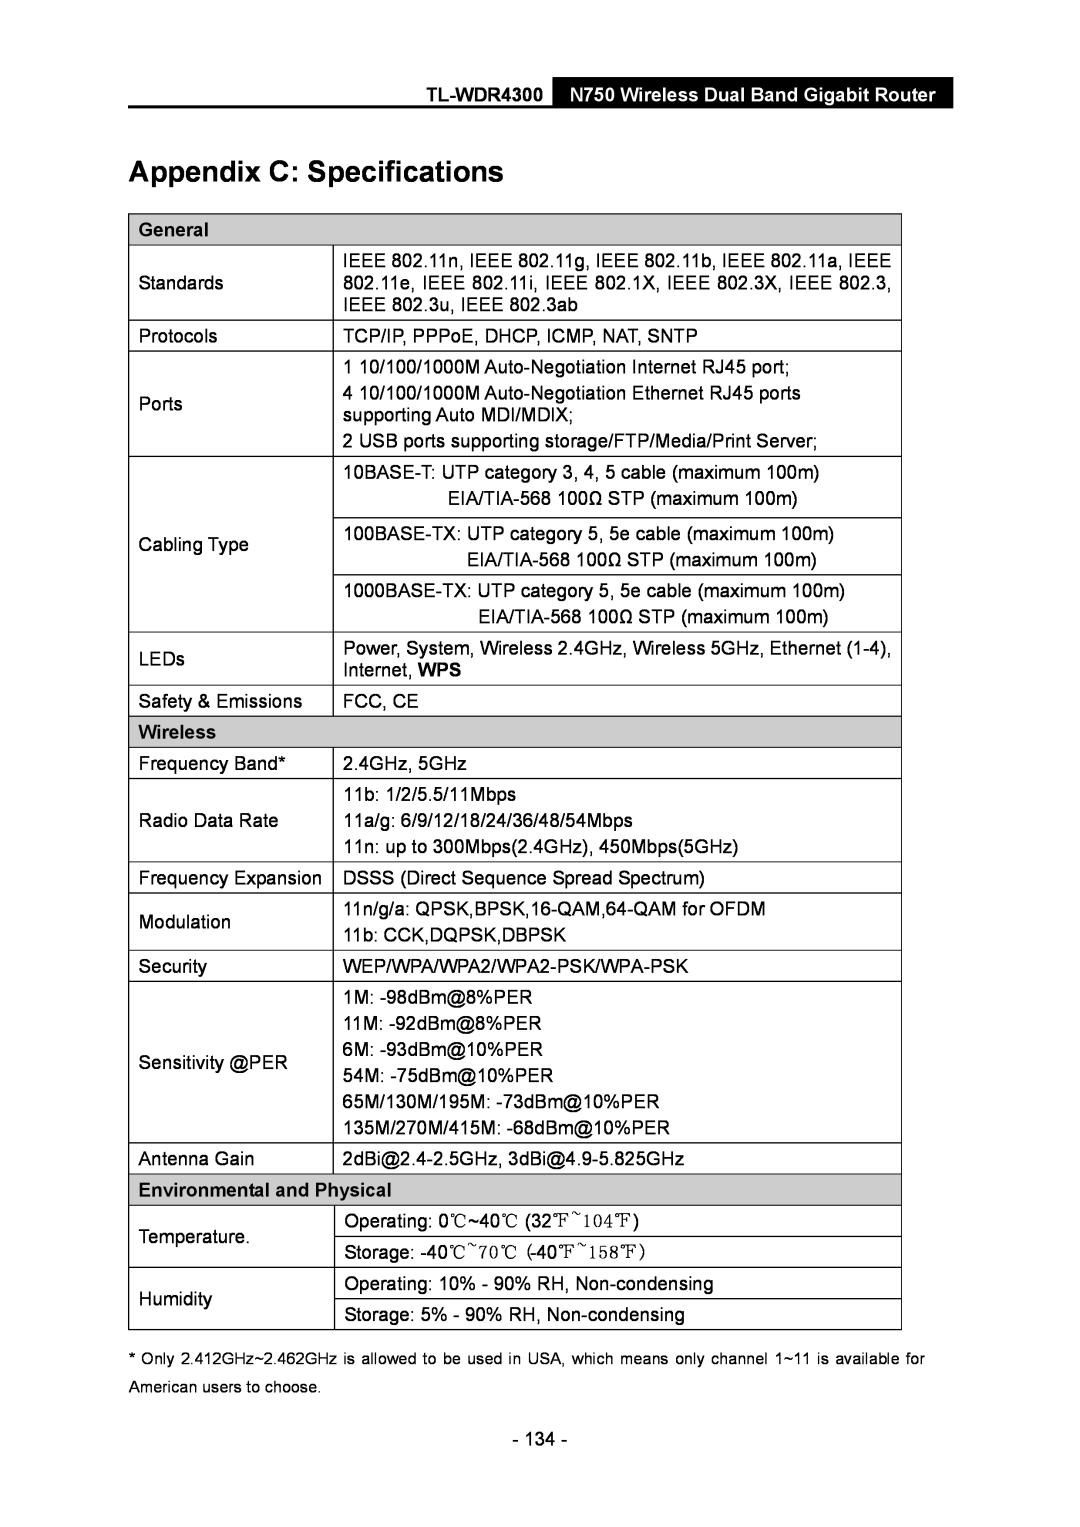 TP-Link TL-WDR4300 manual Appendix C Specifications, General, Wireless, Environmental and Physical 